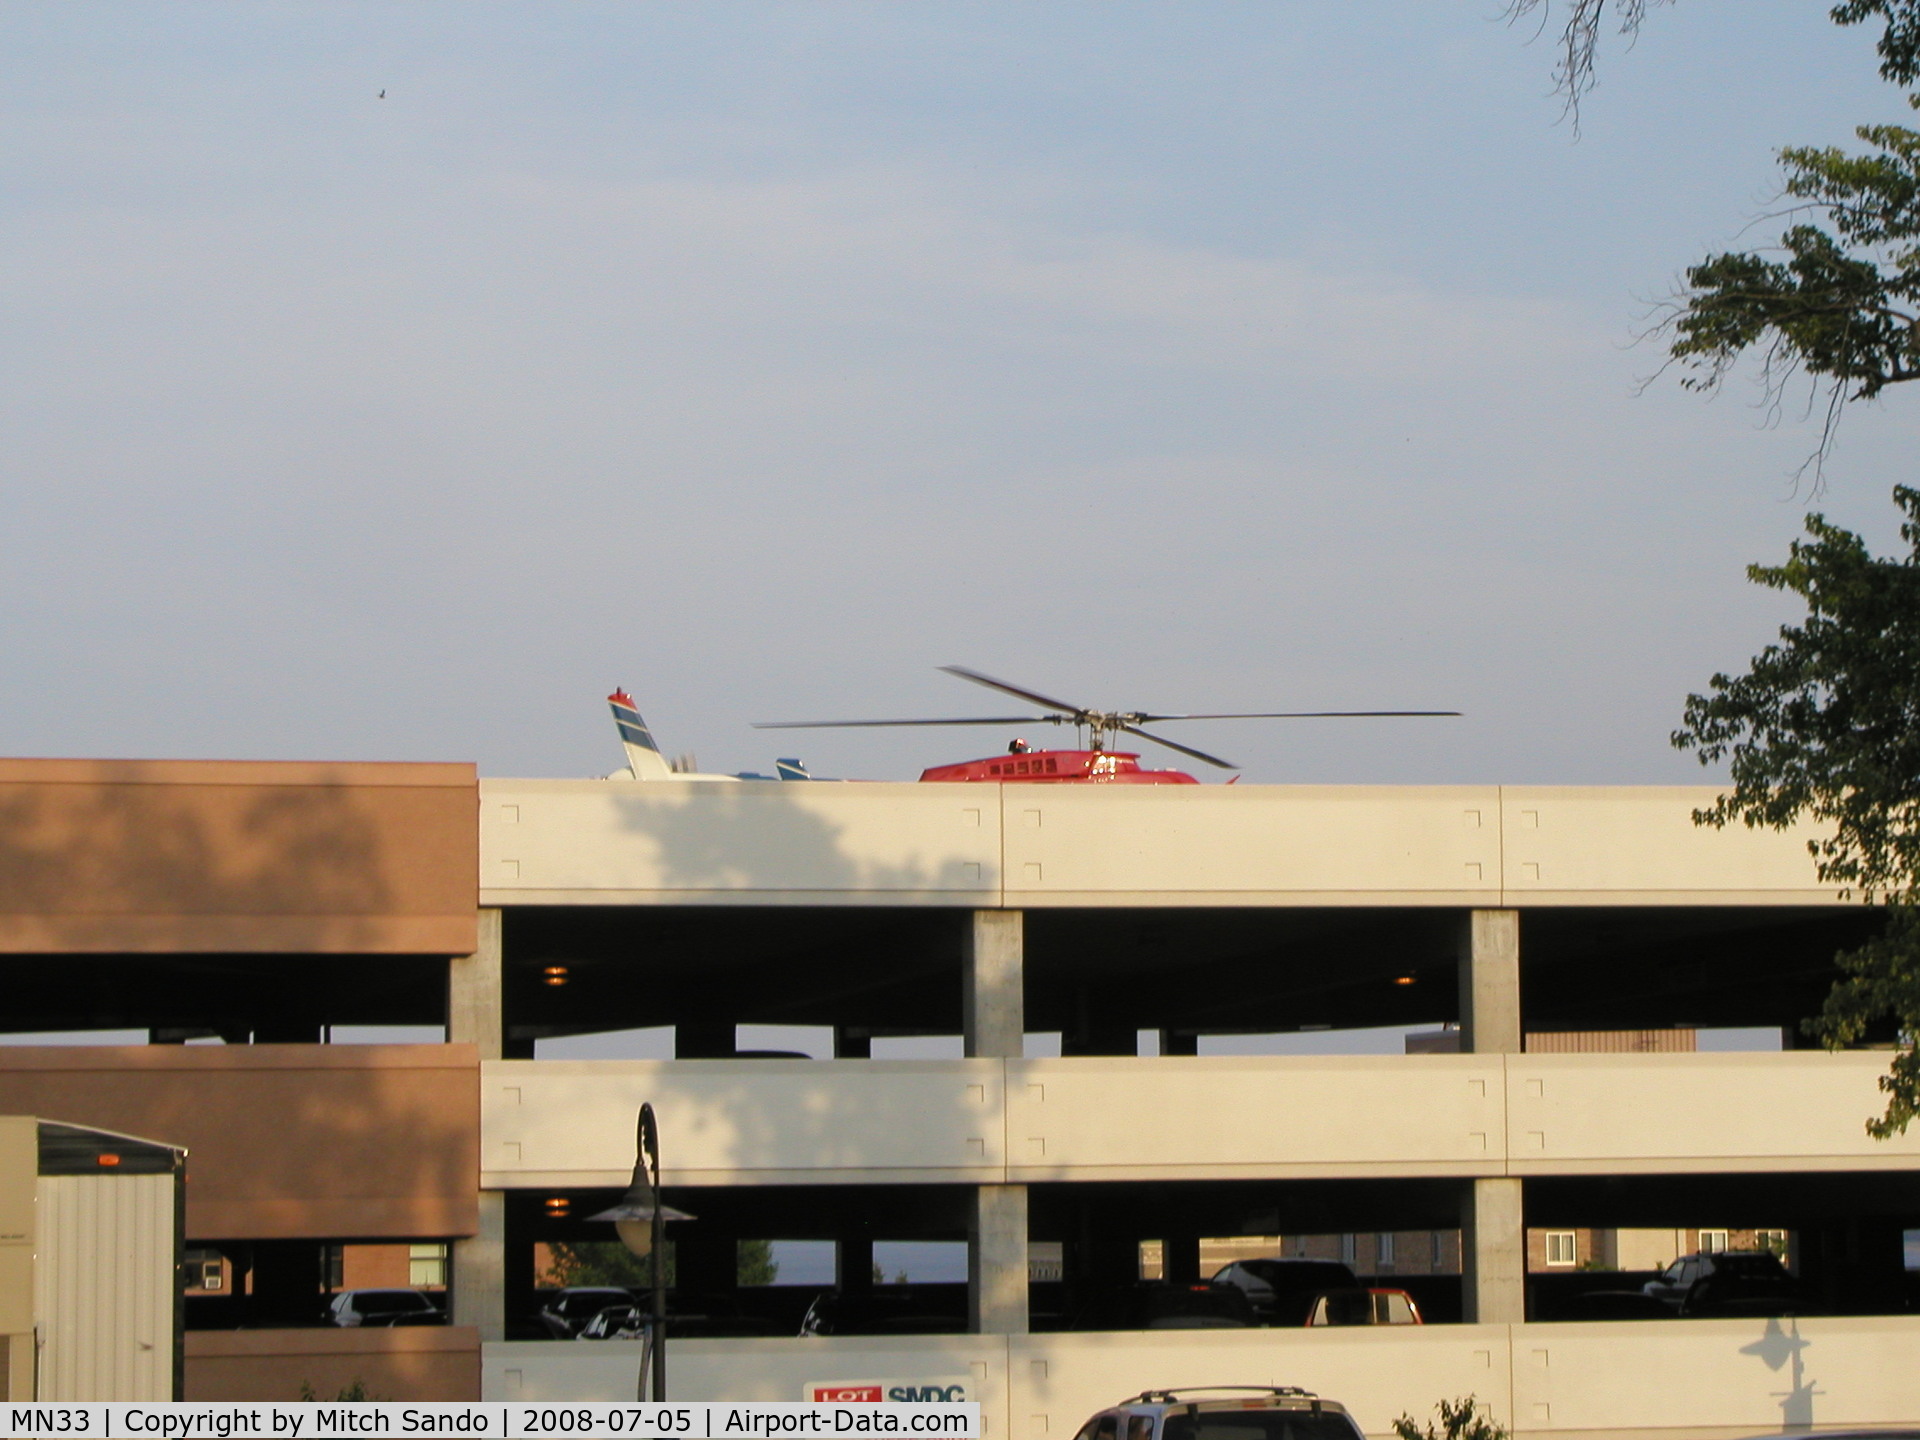 St Mary's Hospital Heliport (MN33) - The Alternate LZ at St. Mary's Duluth (which is the top of a parking ramp).